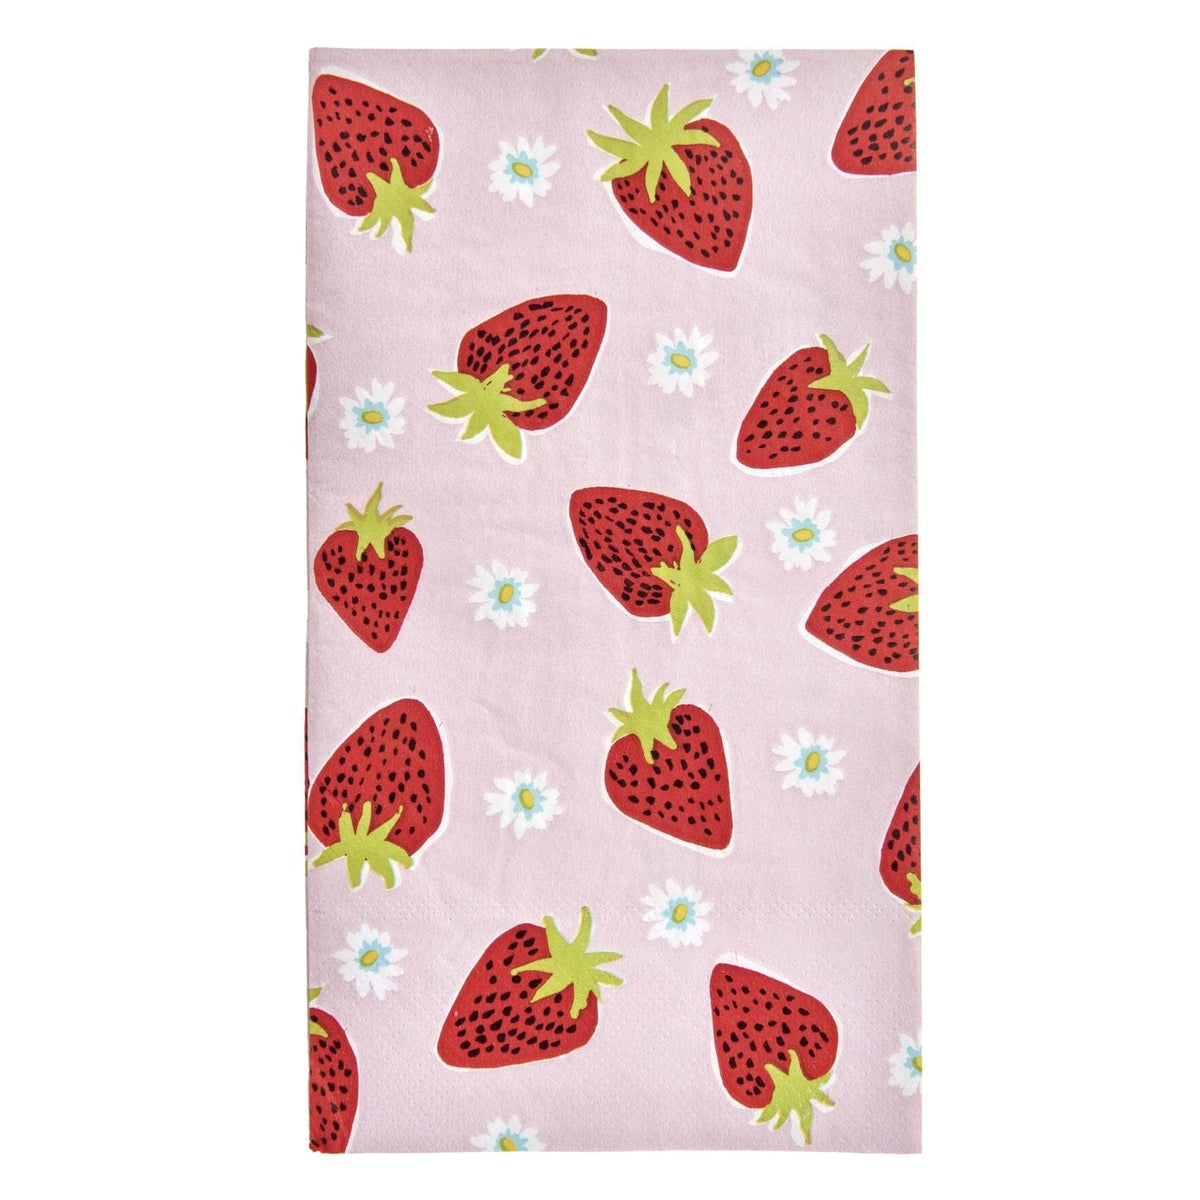 Strawberry Dinner Napkins - 40 Count Roobee Napkins 89212